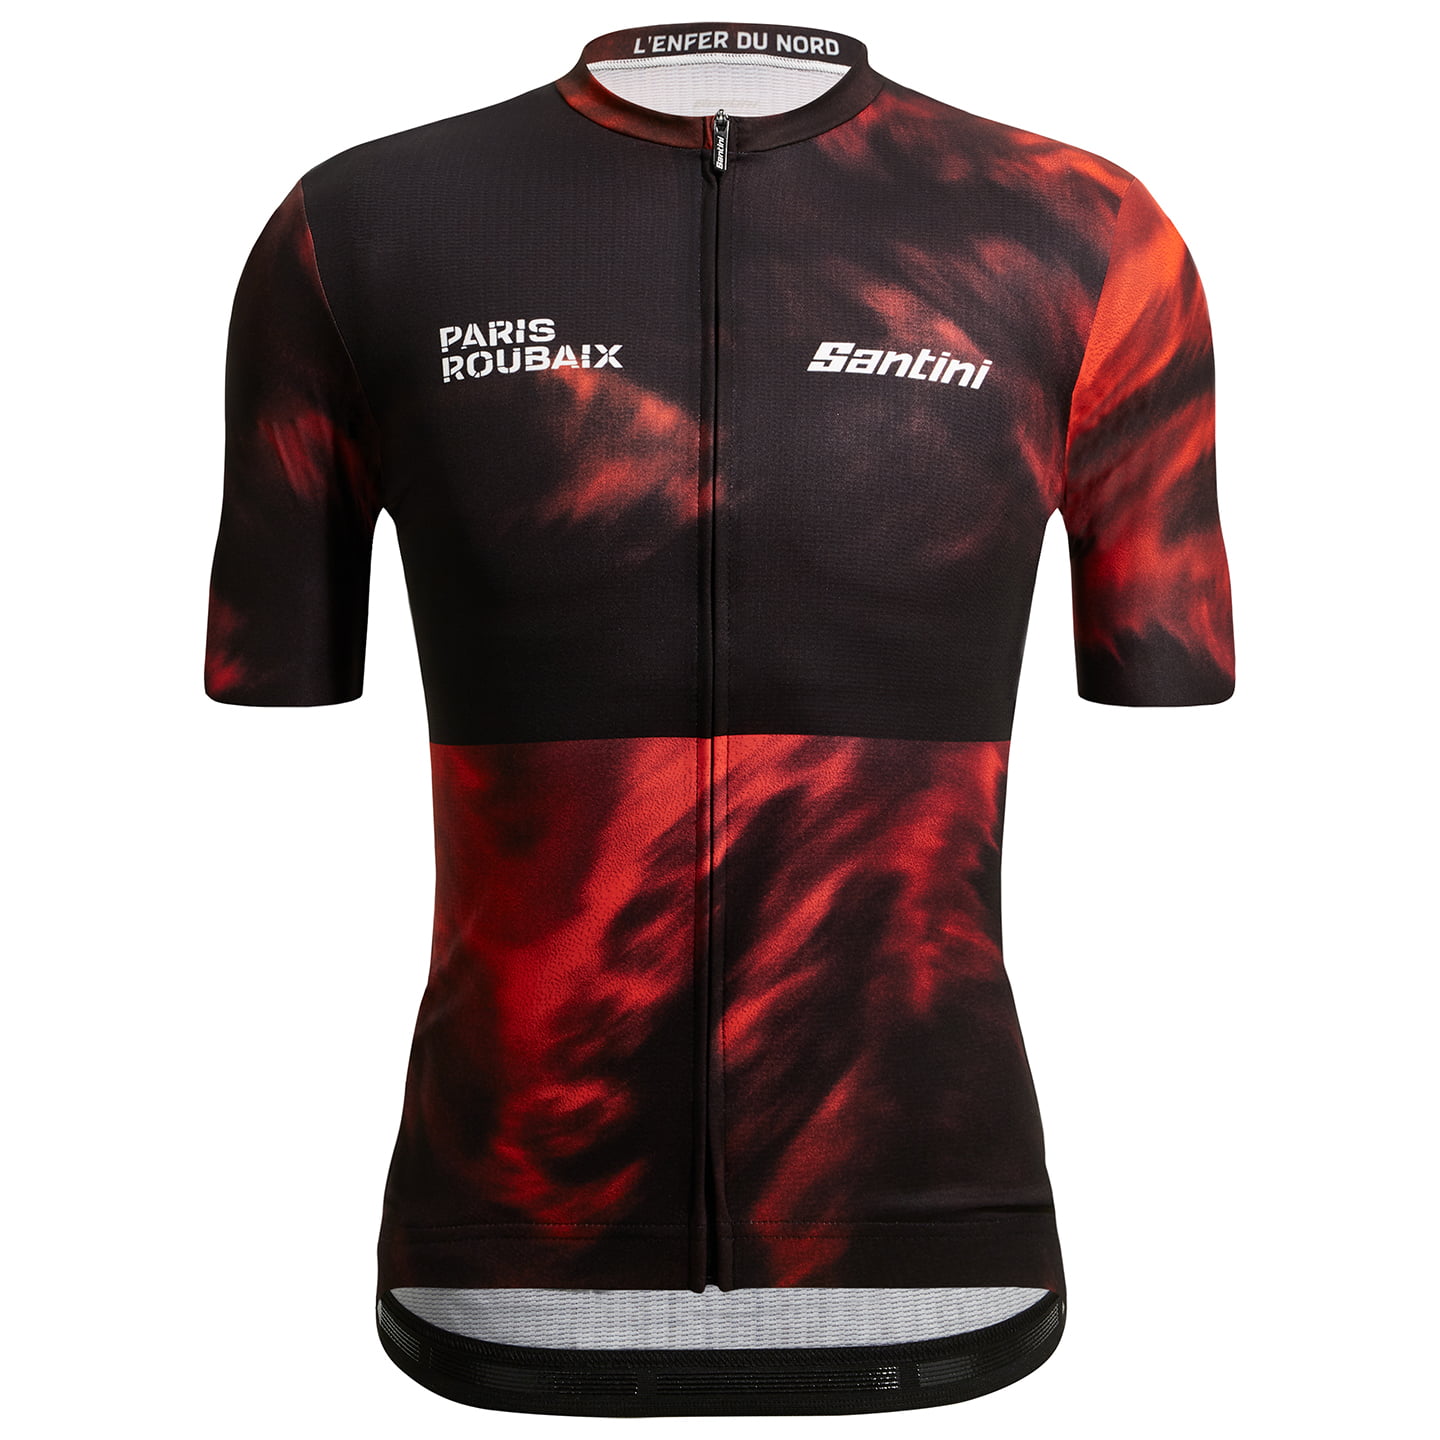 SANTINI Paris-Roubaix Enfer du Nord 2023 Short Sleeve Jersey, for men, size S, Cycling jersey, Cycling clothing